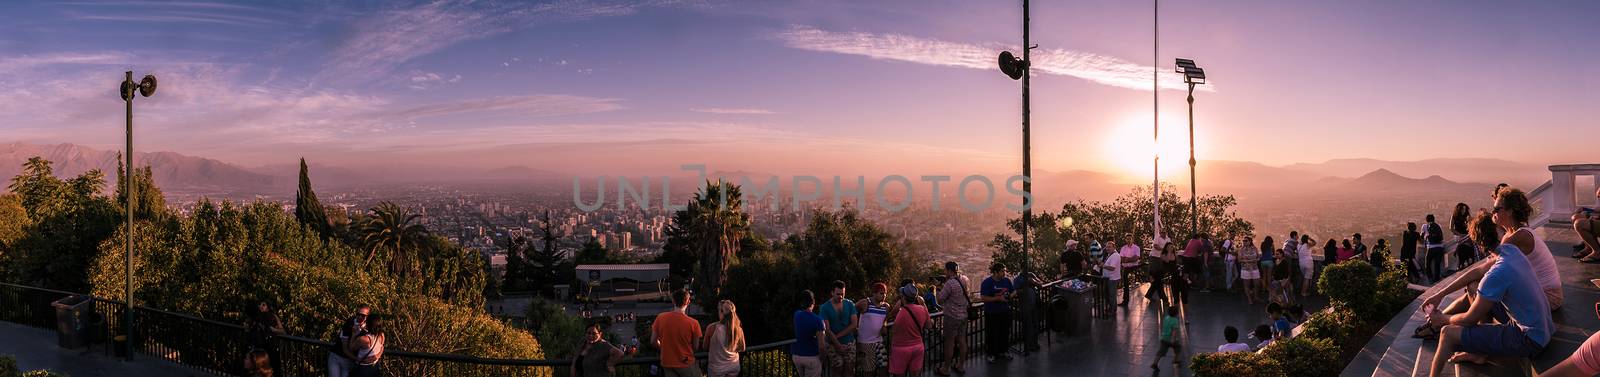 Astonishing sunset panoramic view of Santiago de Chile from Cerro San Cristobal, Chile by mikelju